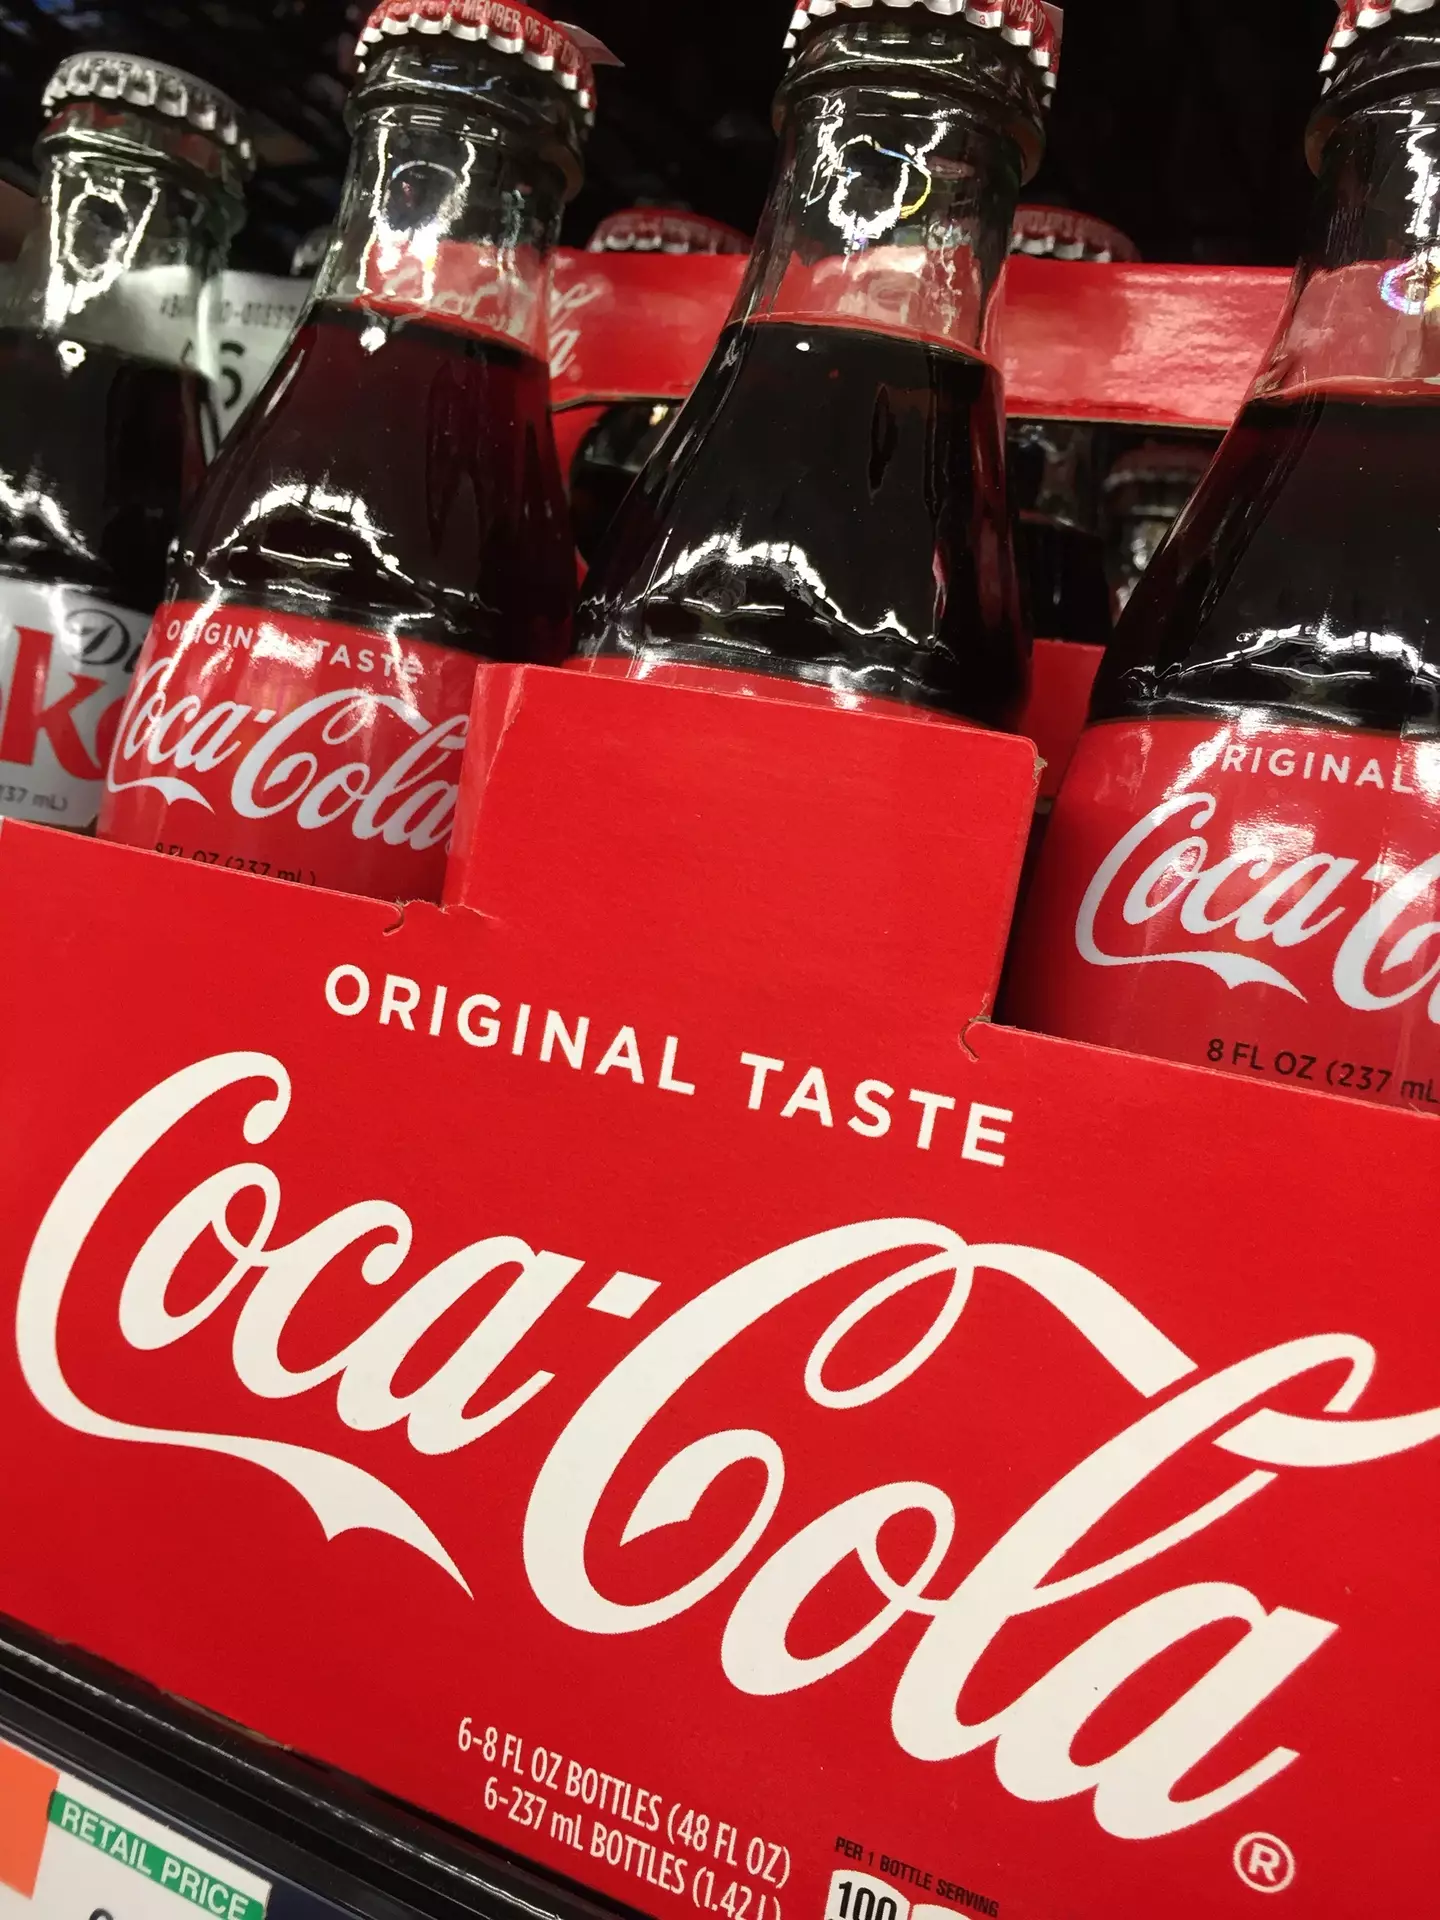 You can get your hands on a bottle of the Coca-Cola Original Taste if you visit the truck.